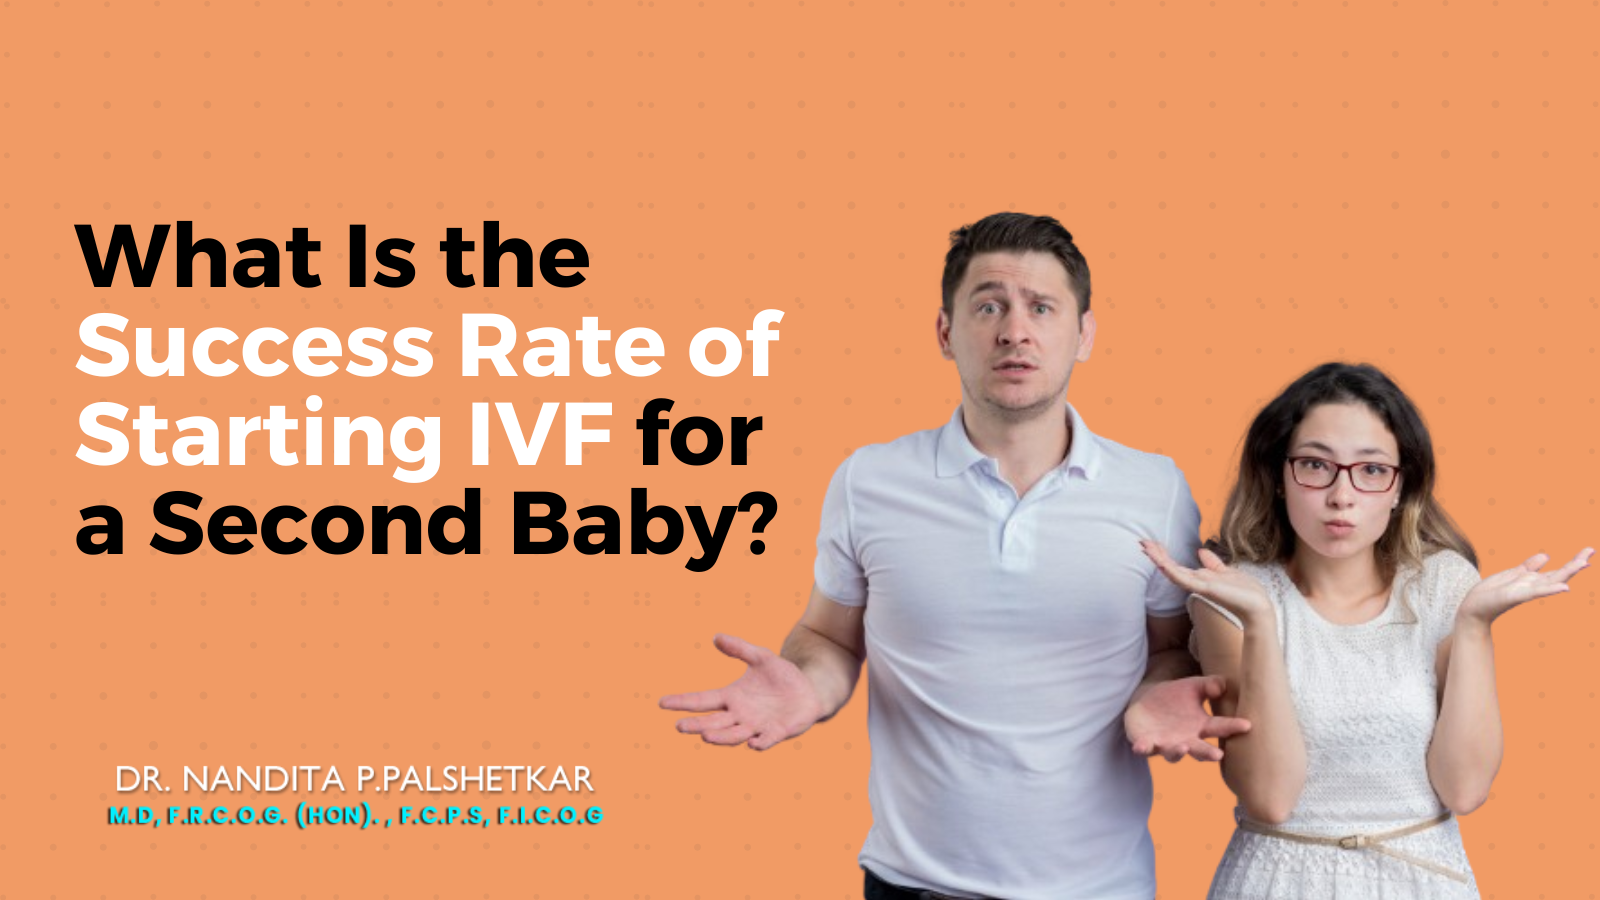 What Is the Success Rate of Starting IVF for a Second Baby?